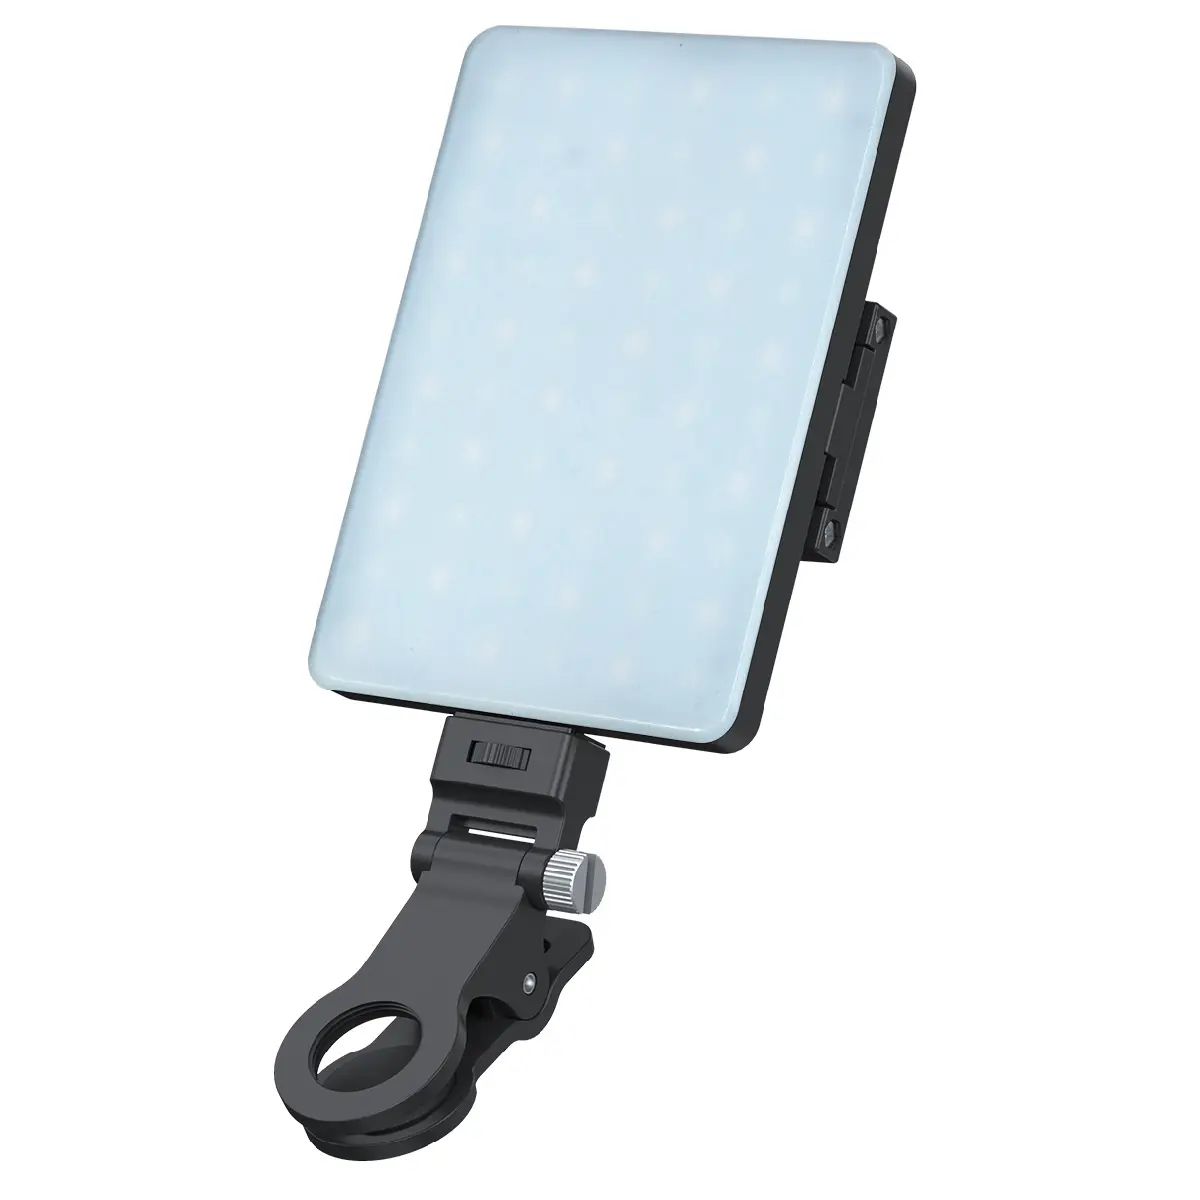 High Quality OEM Cell Phone Fill Light Bi-color dimmable Customize 2000mAh 5W LED Photography panel video light With Clip